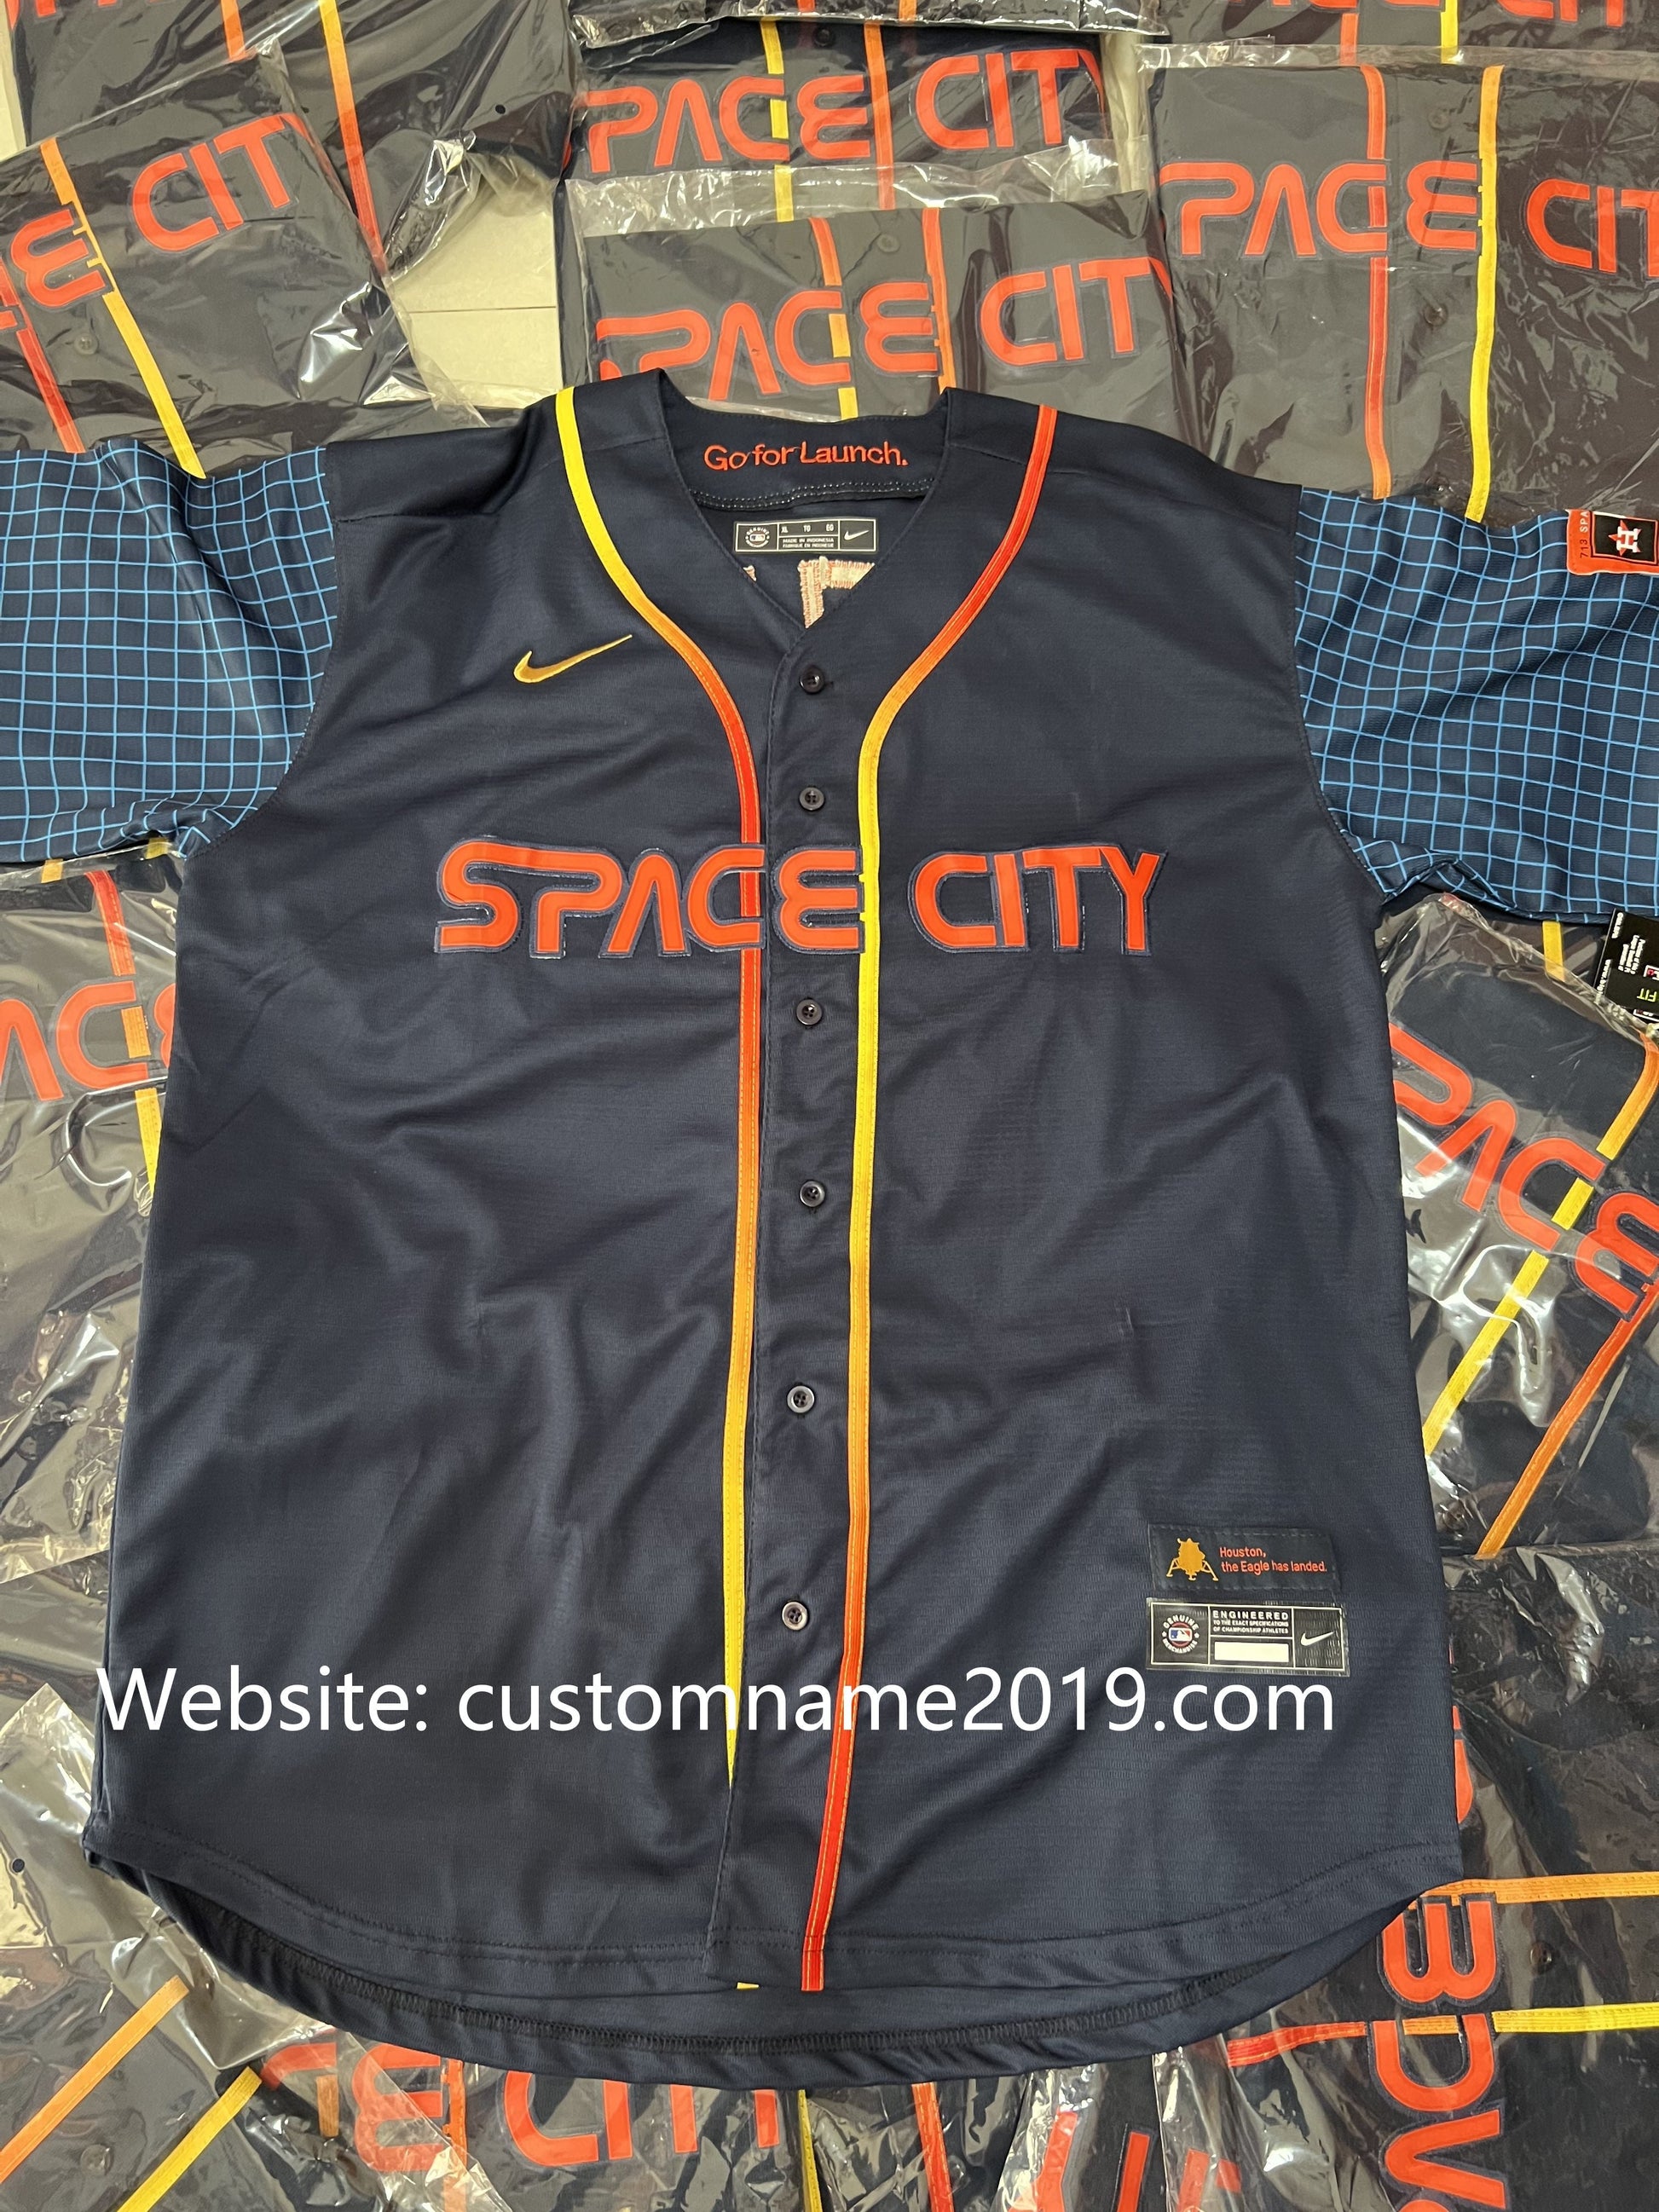 Astros 2023 Space City Champions Custom Jersey – All Stitched